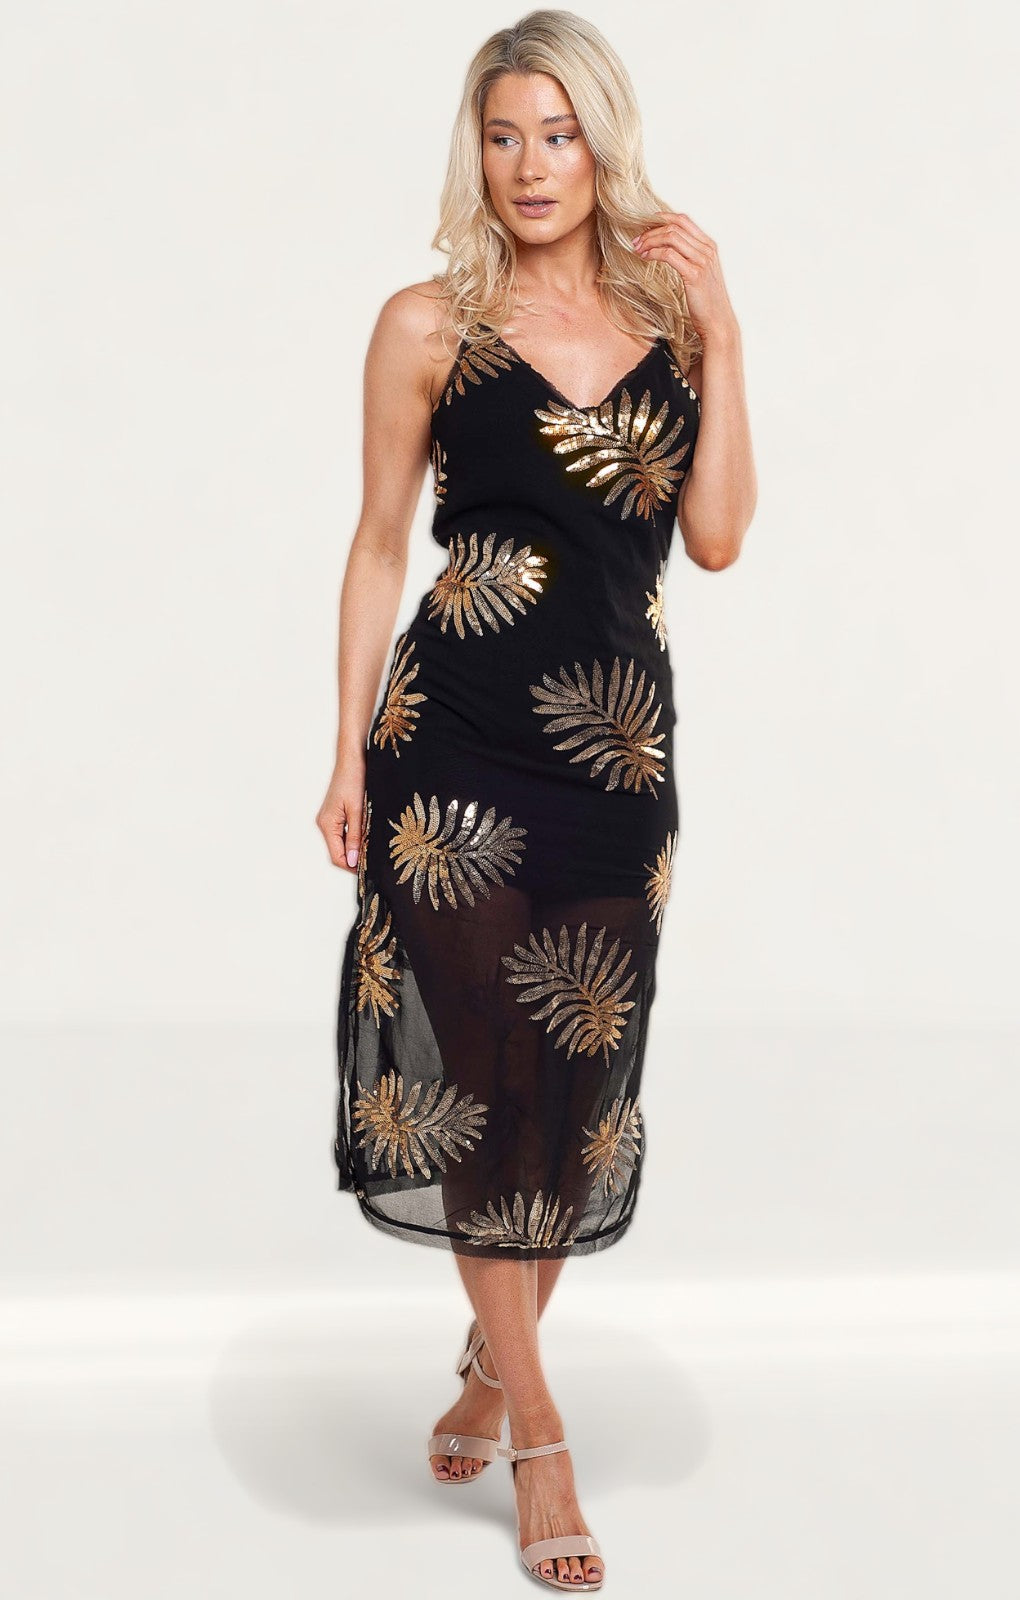 Finders Keepers Glimmer Dress product image